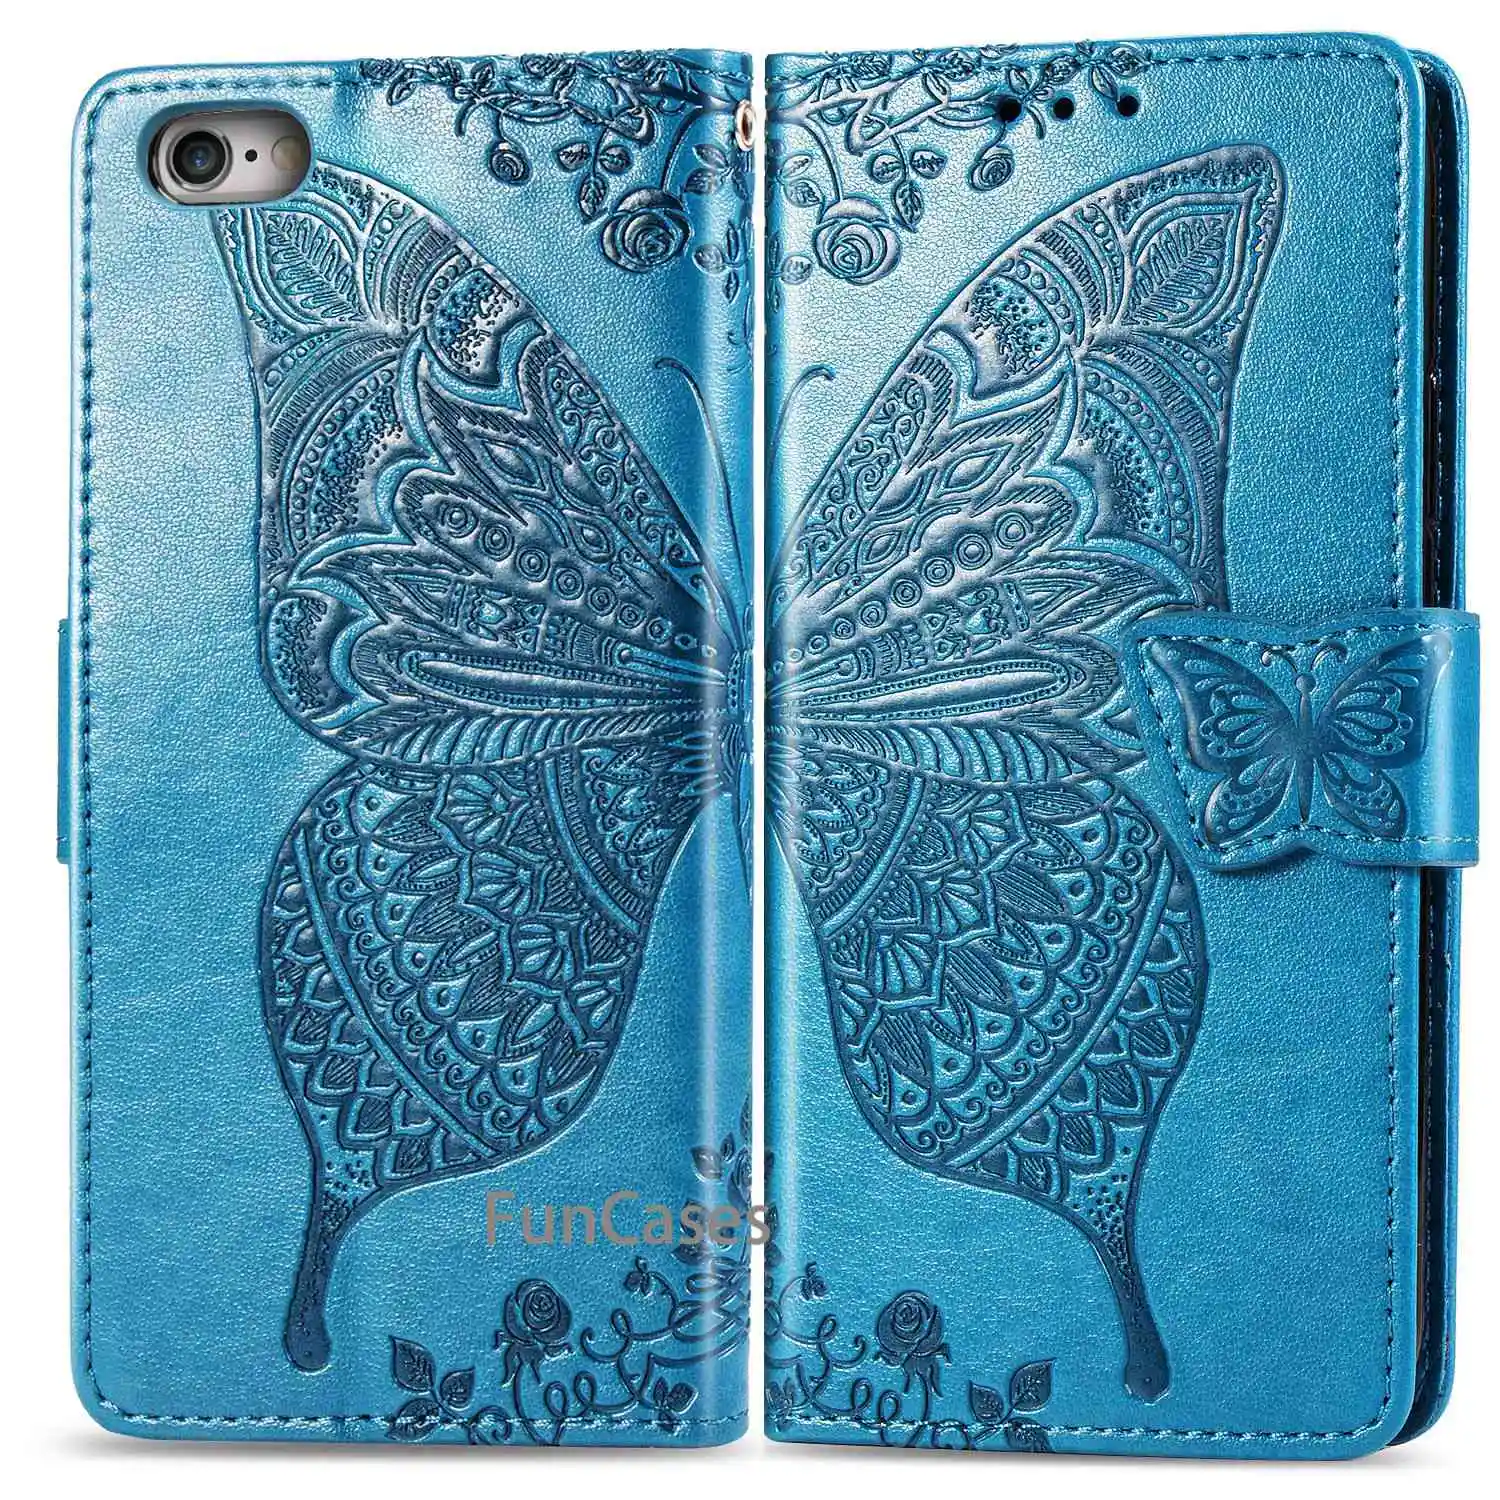 Luxury Wallet Cover Fundas Soft Silicone Case For iPhone 6 6s Leather Cases Capinha iphone6 s Coque flip cover stitch | Мобильные